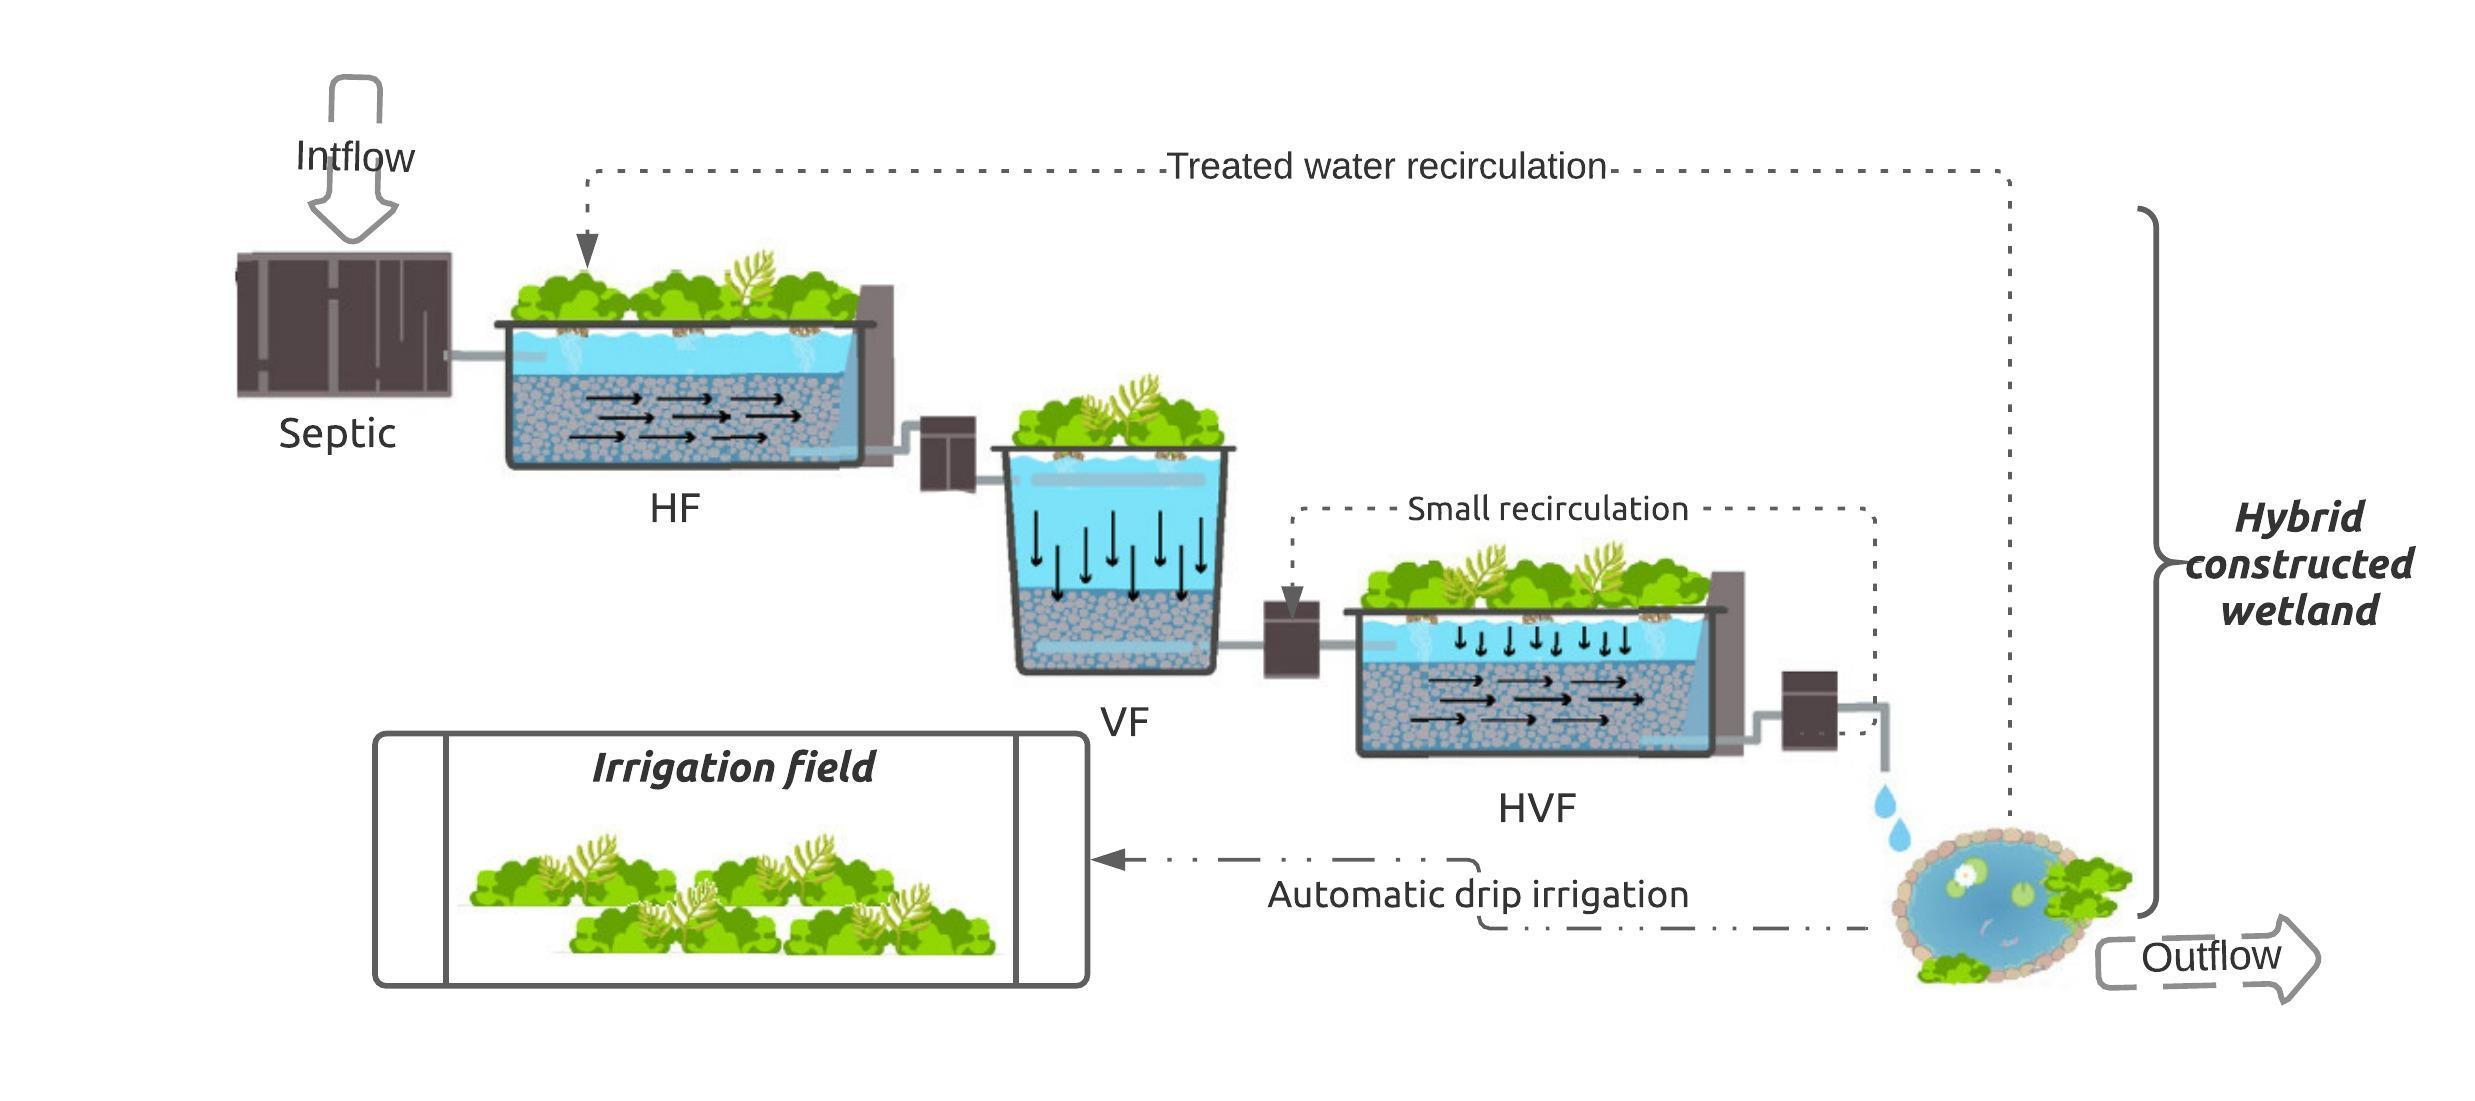 Assessment of pathogen removal efficiency of vertical flow constructed  wetland treating septage